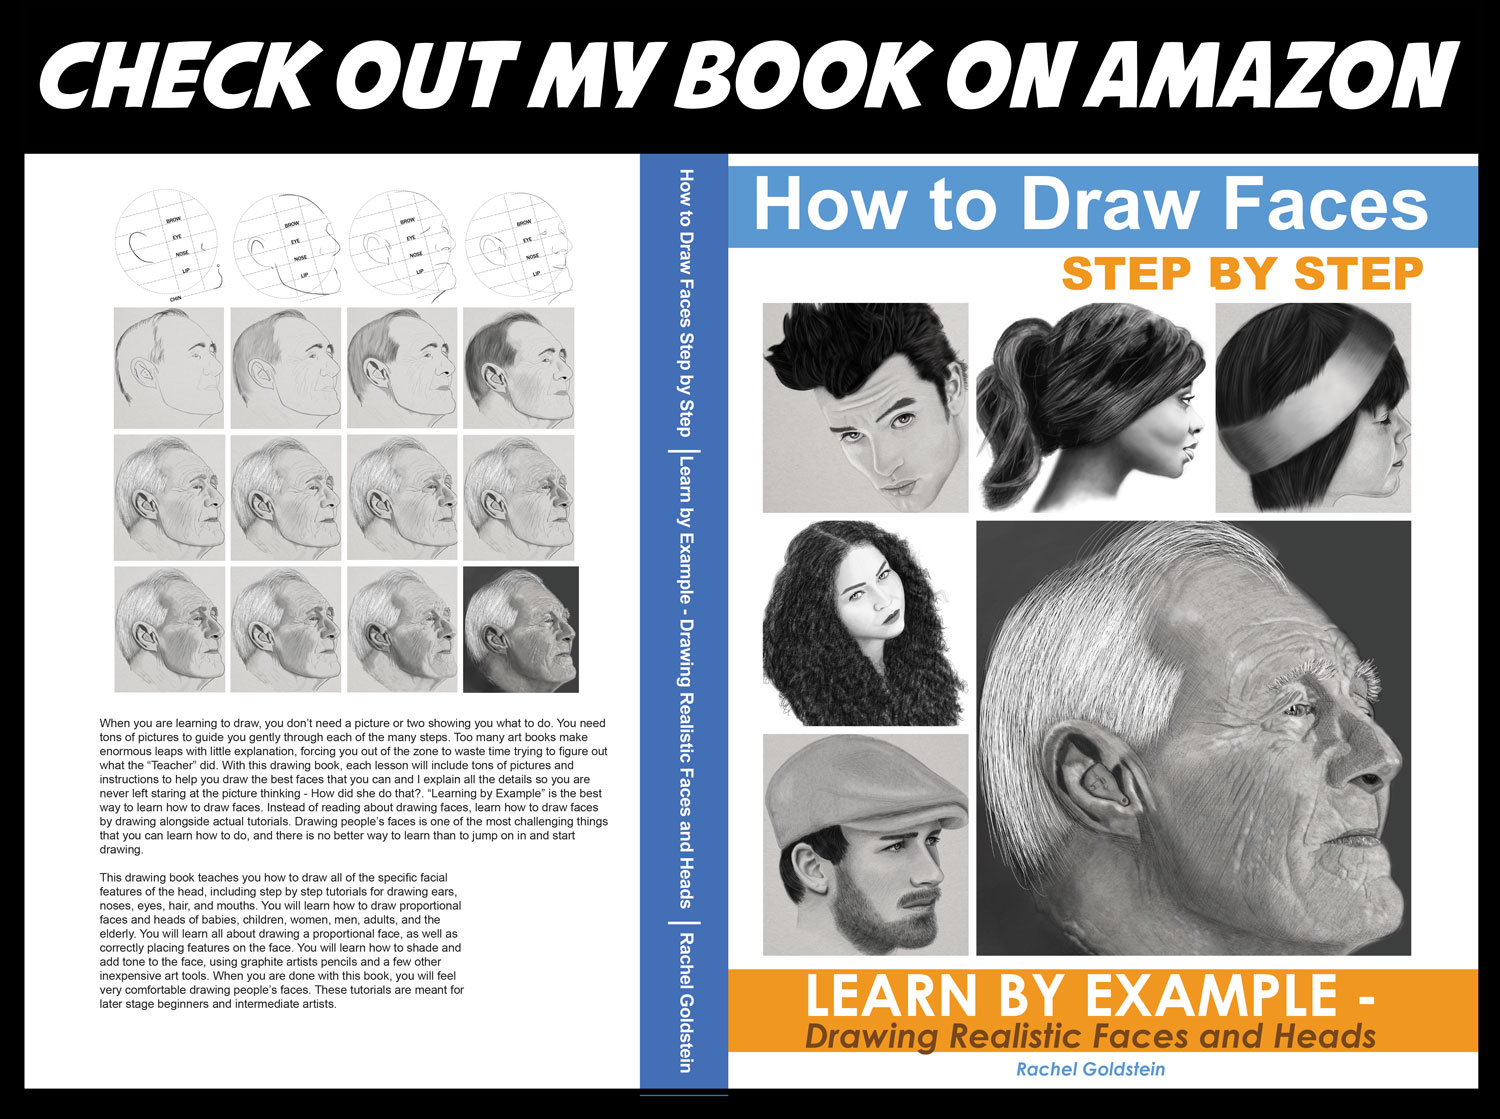 how to draw a mouth step by step for kids